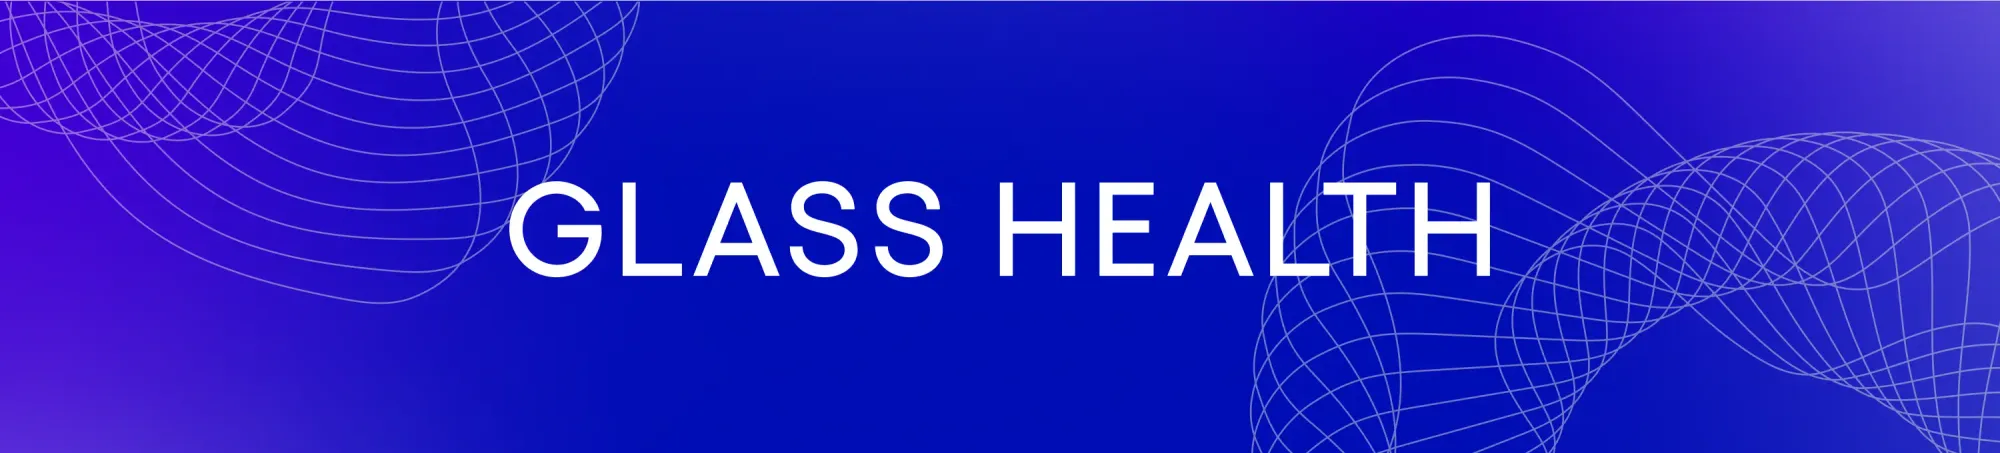 Glass Health Raises $5M for AI-Powered Clinical Decision Support Platform